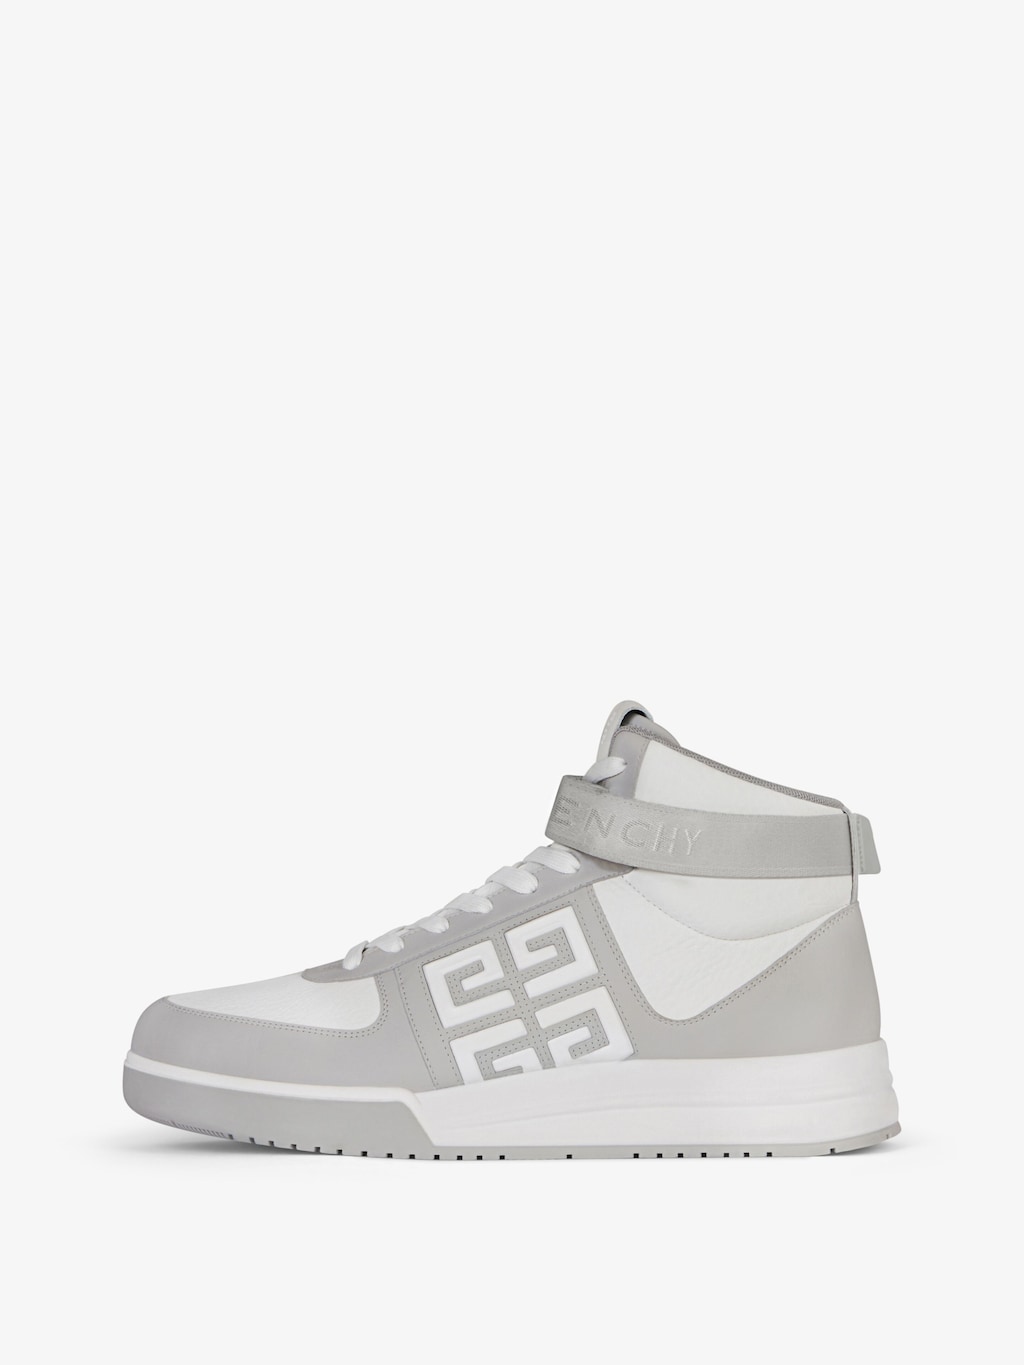 G4 high top sneakers in leather - grey/white | Givenchy US